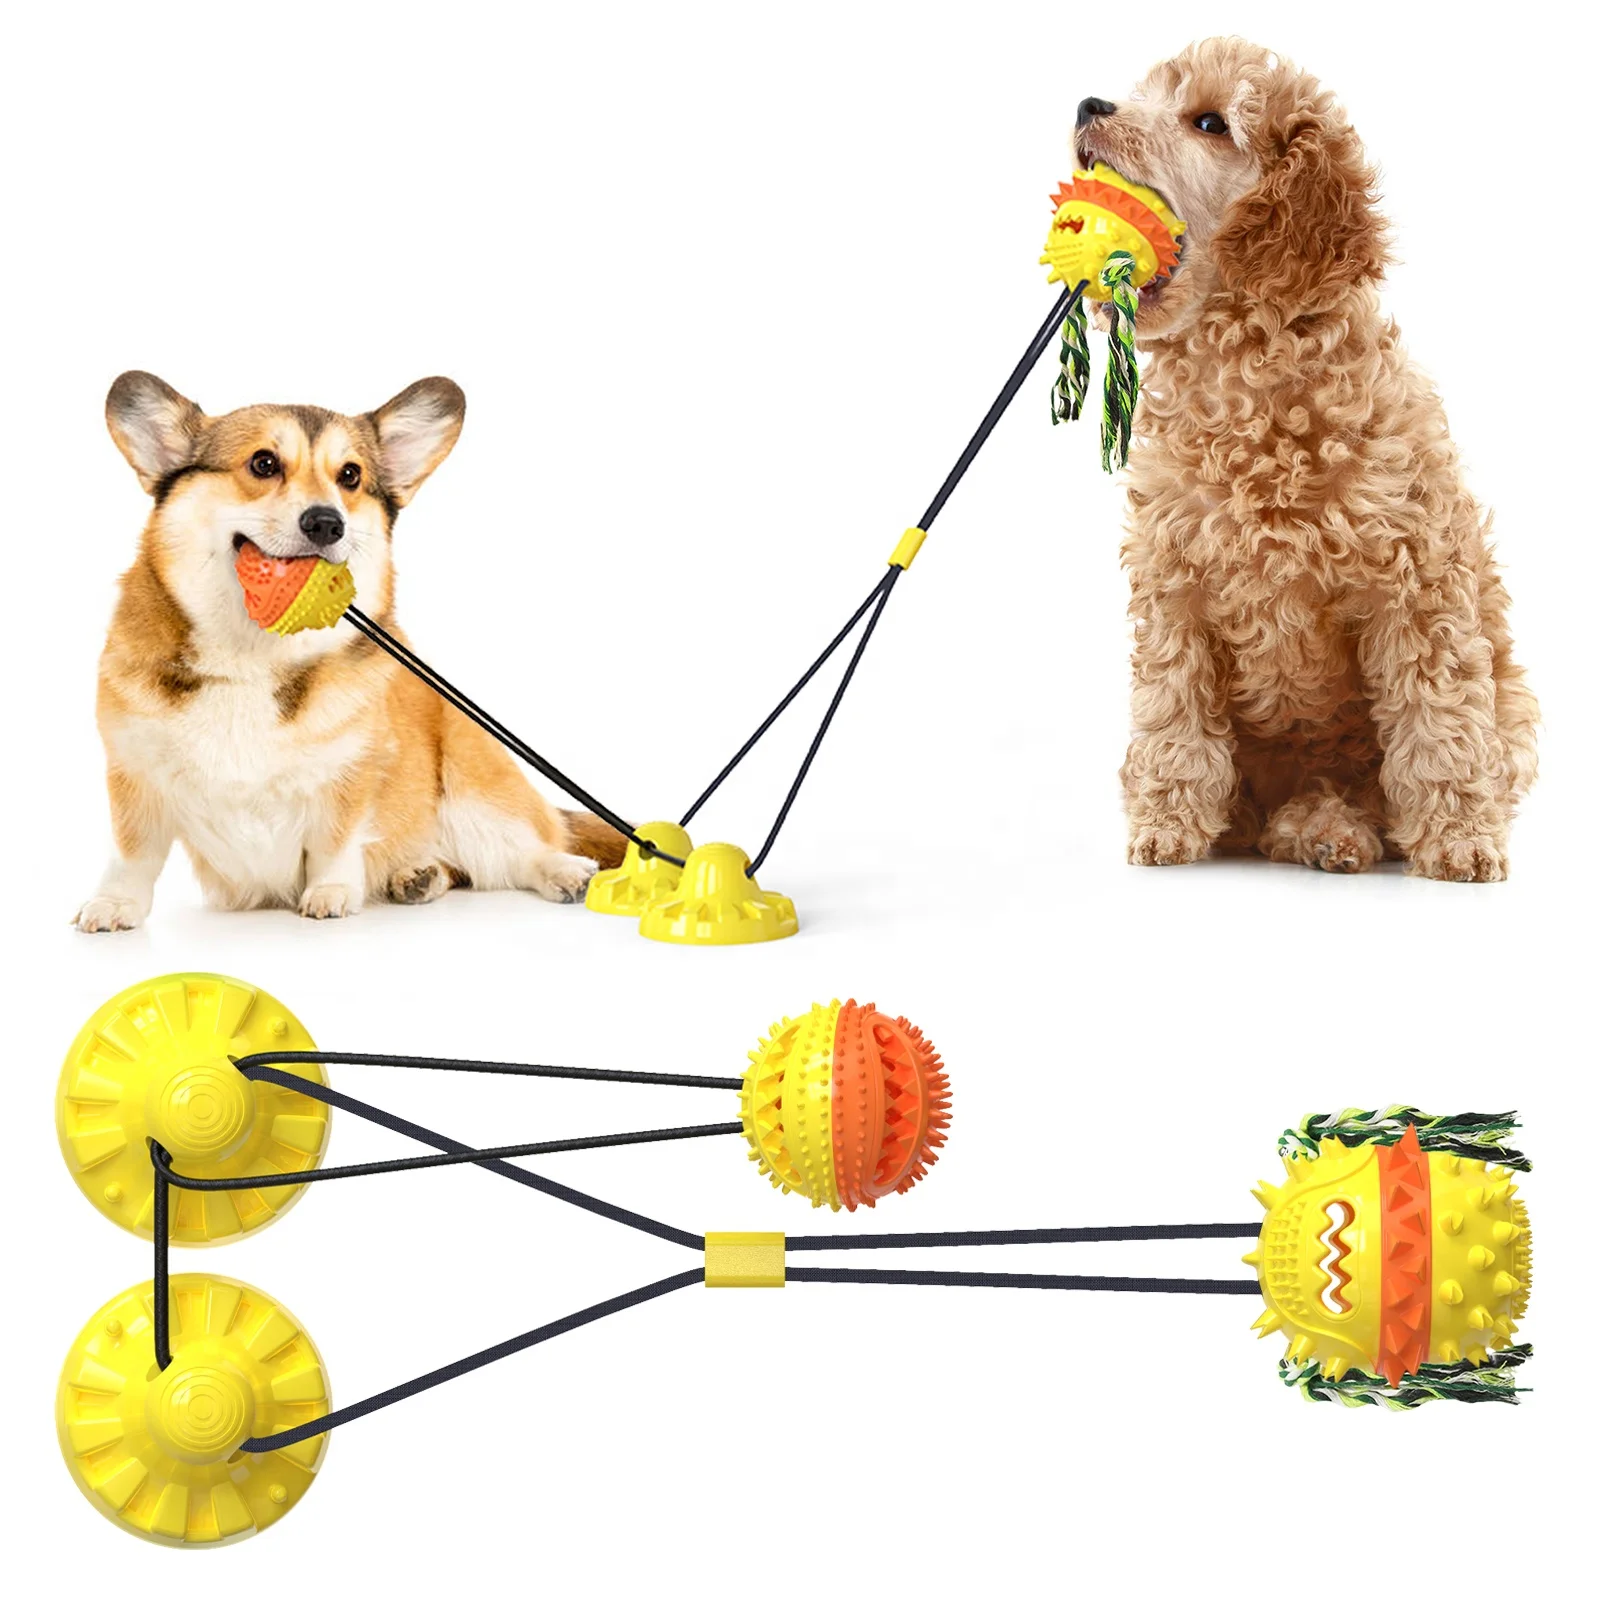 

Secure double suction cups pet molar ball training leaking food bite resistant nylon rope tugged chew toy natural rubber dog toy, Blue yellow d/blue